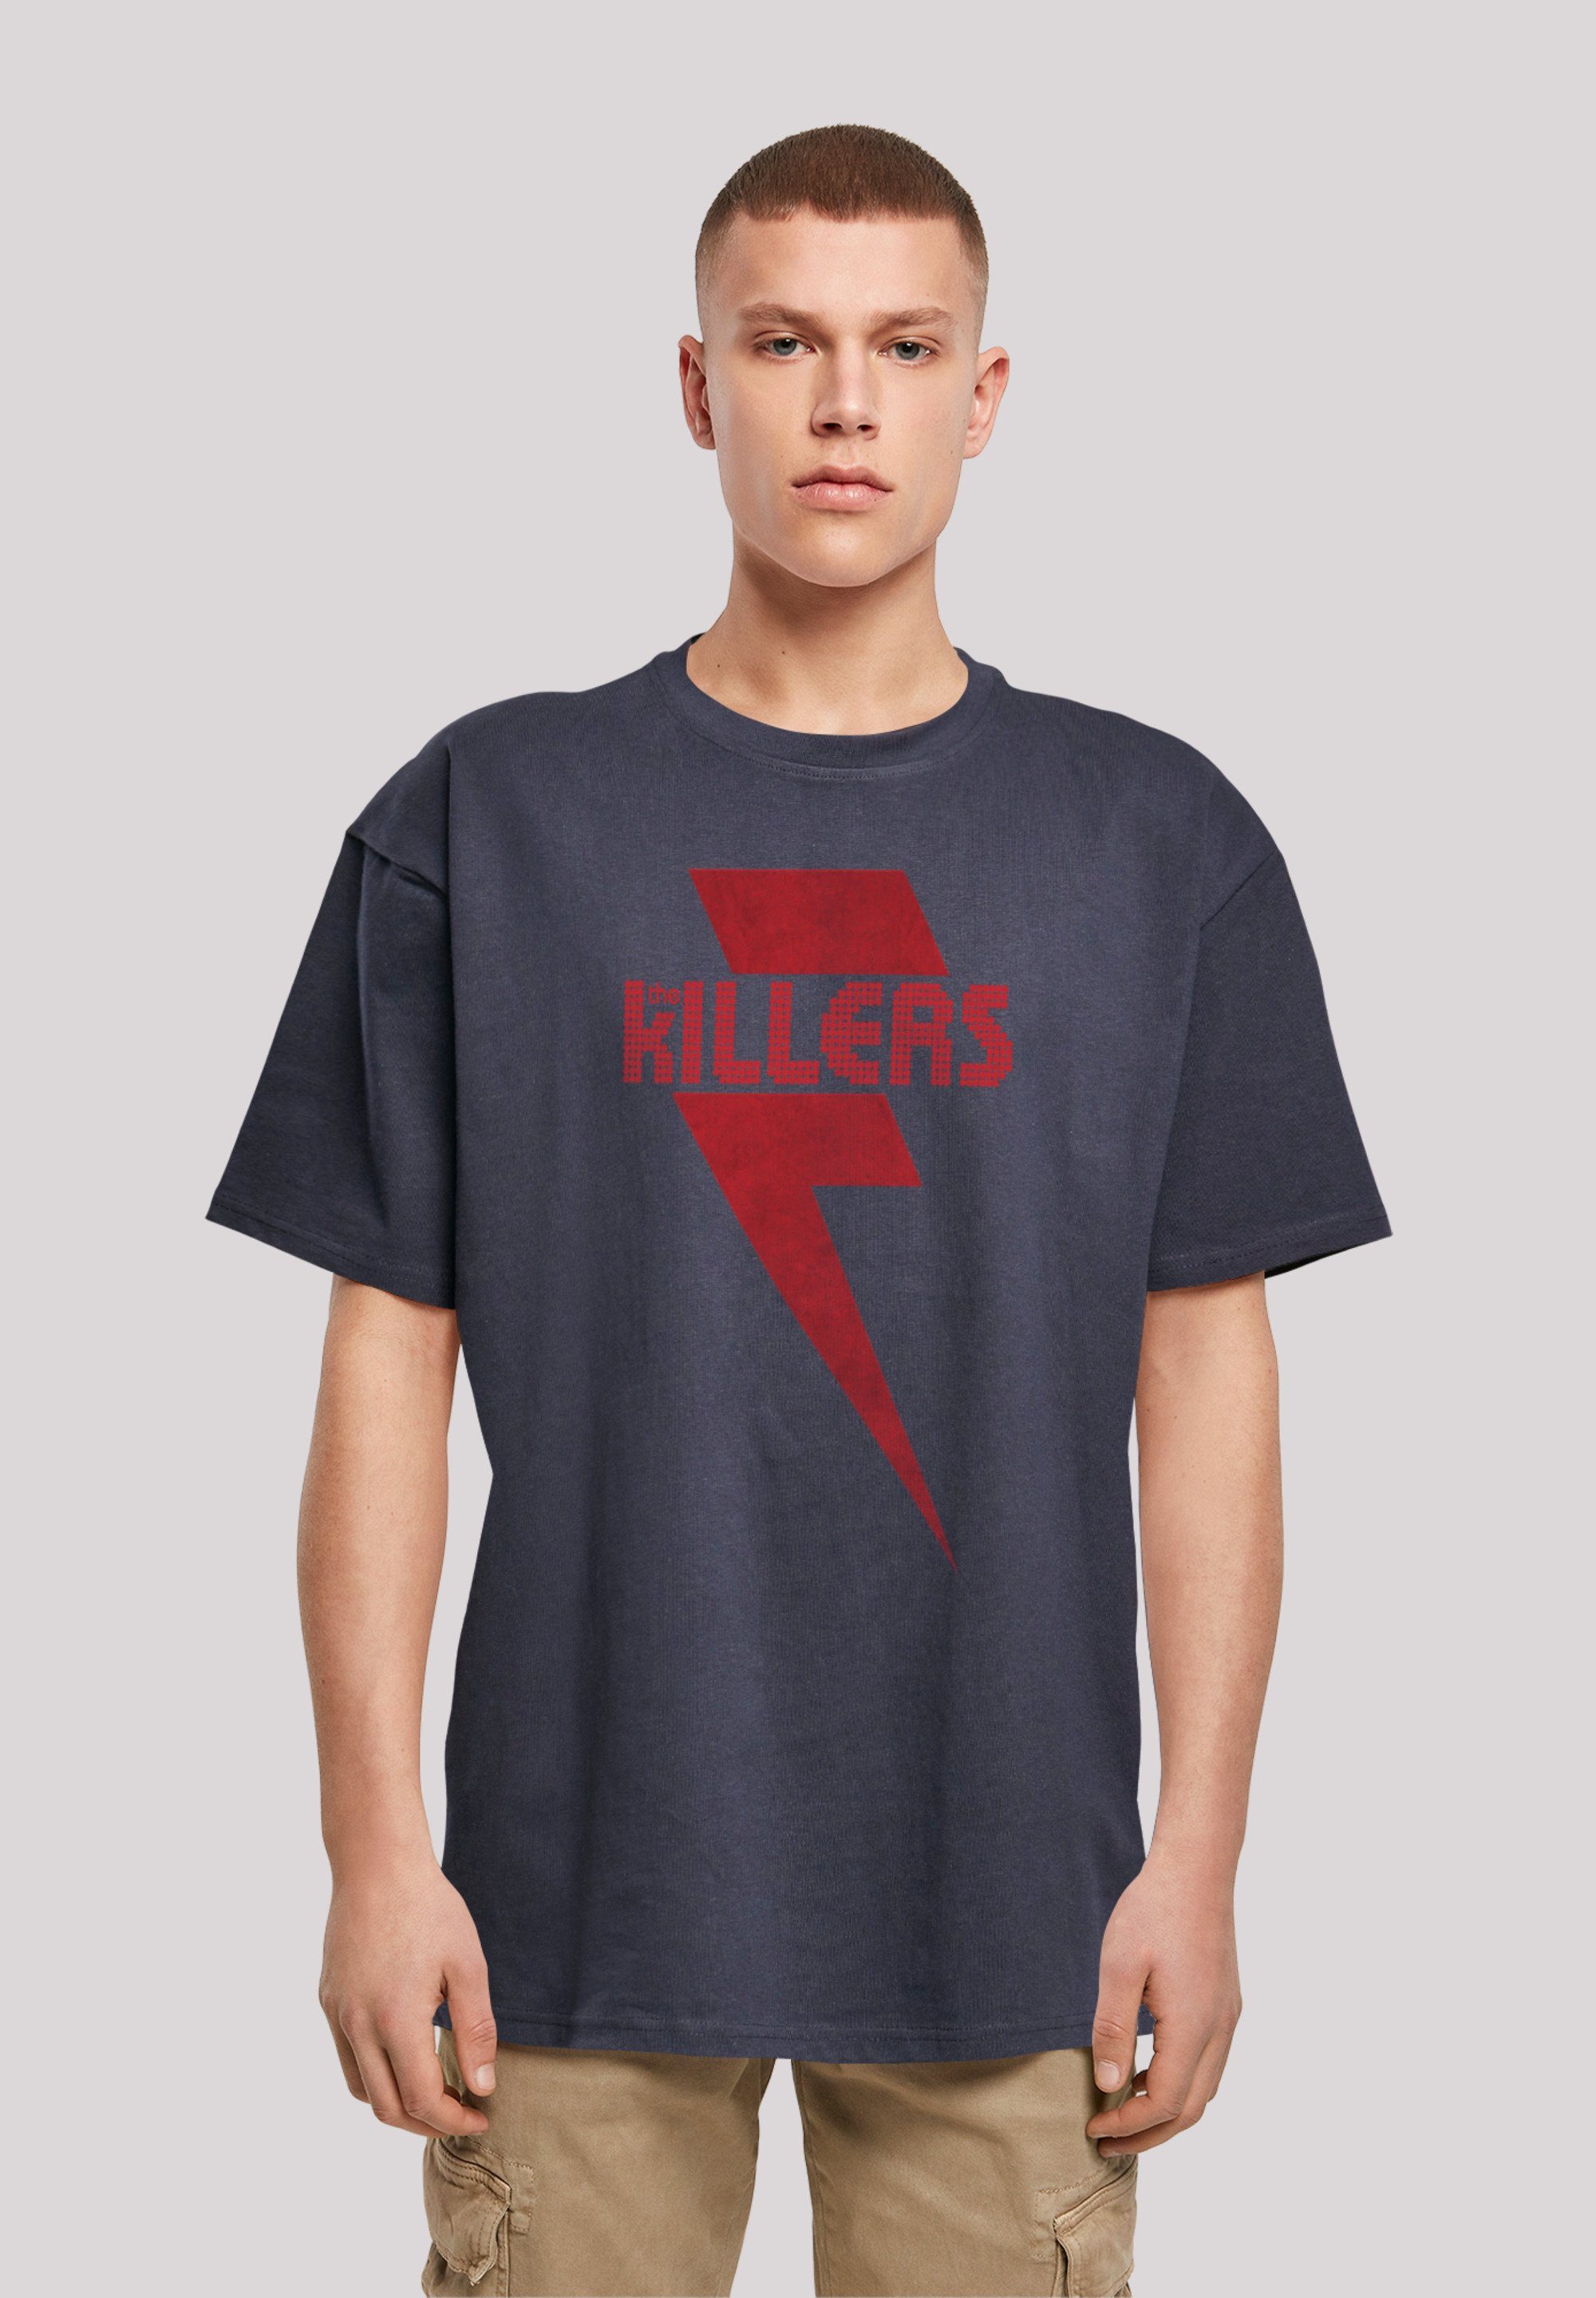 F4NT4STIC T-Shirt The Killers Rock Band Red Bolt Print navy